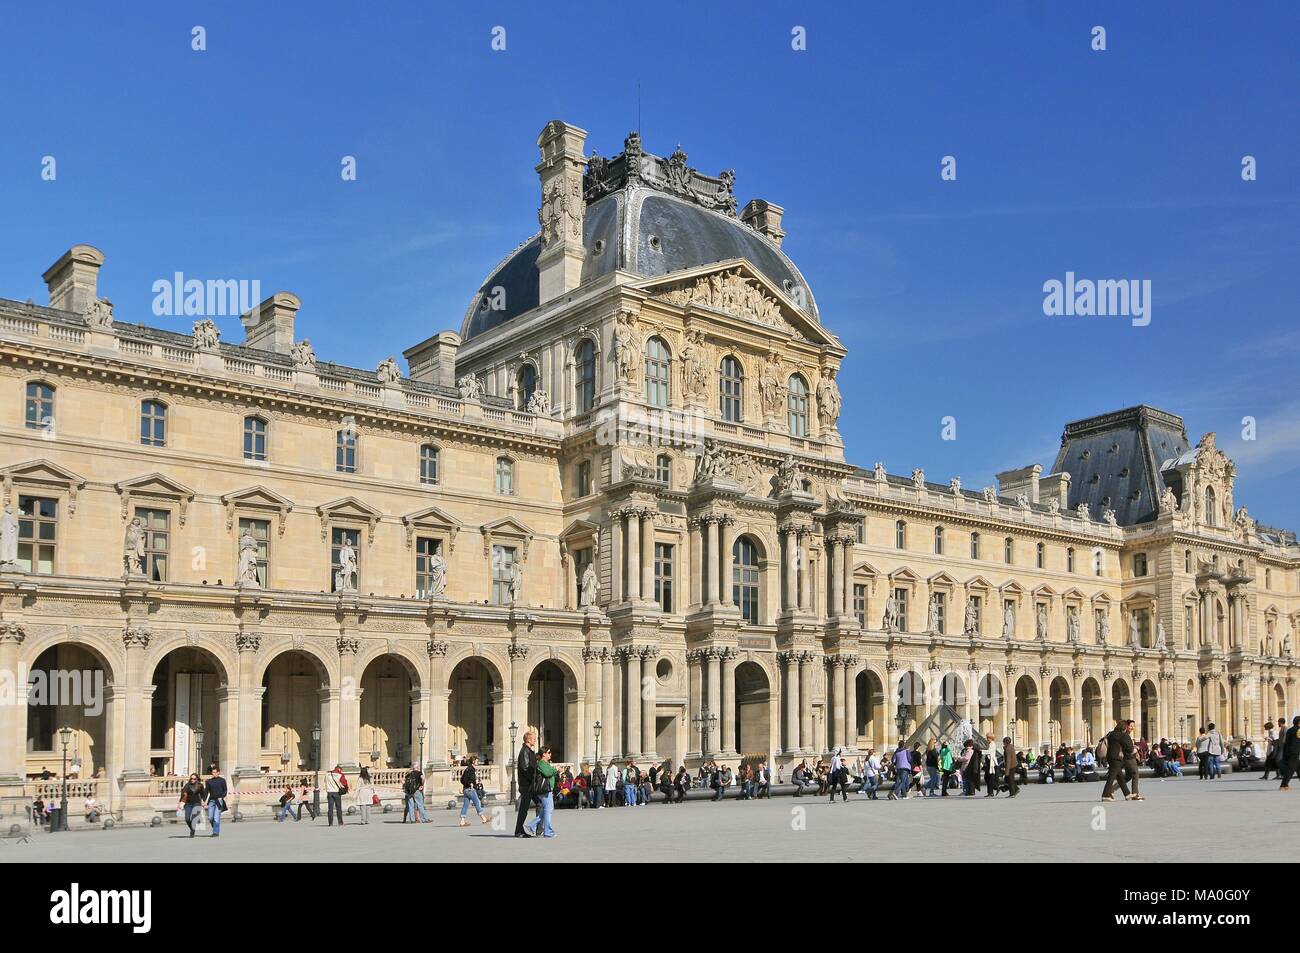 Visitors Outside The Louvre Art Gallery And Museum Paris France